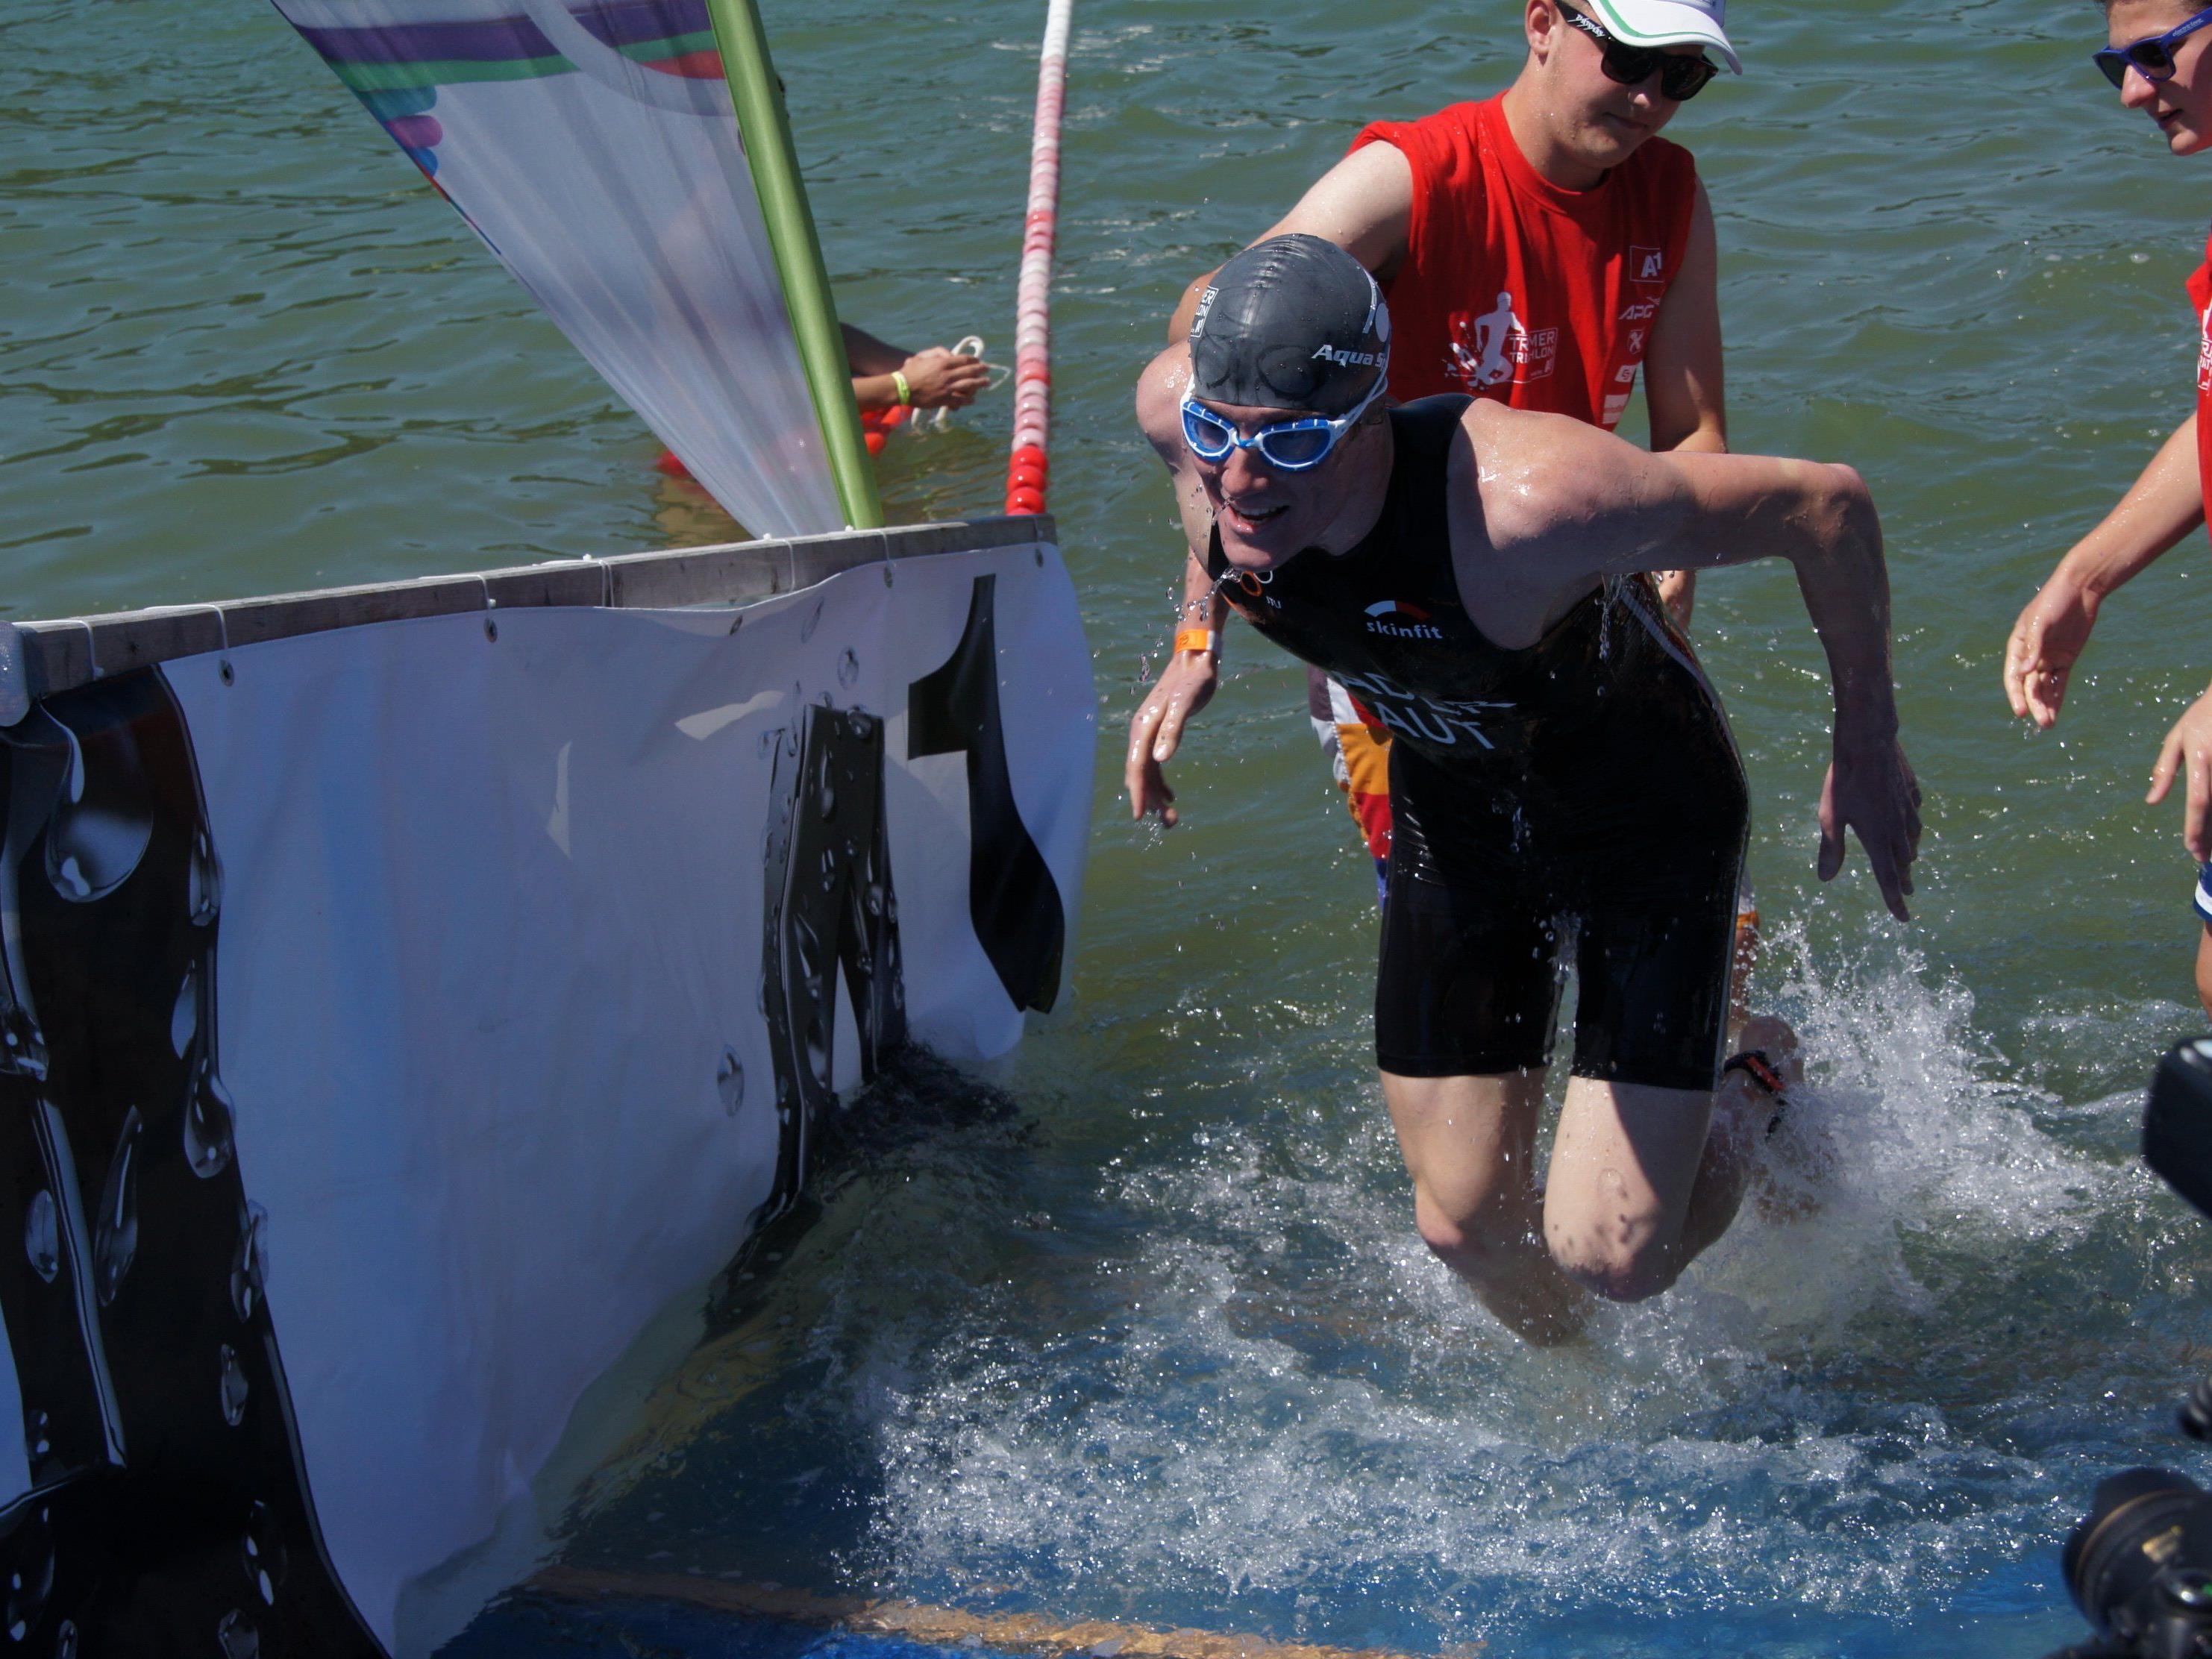 First out the Water - Martin Bader (MP-Team Dornbirn)